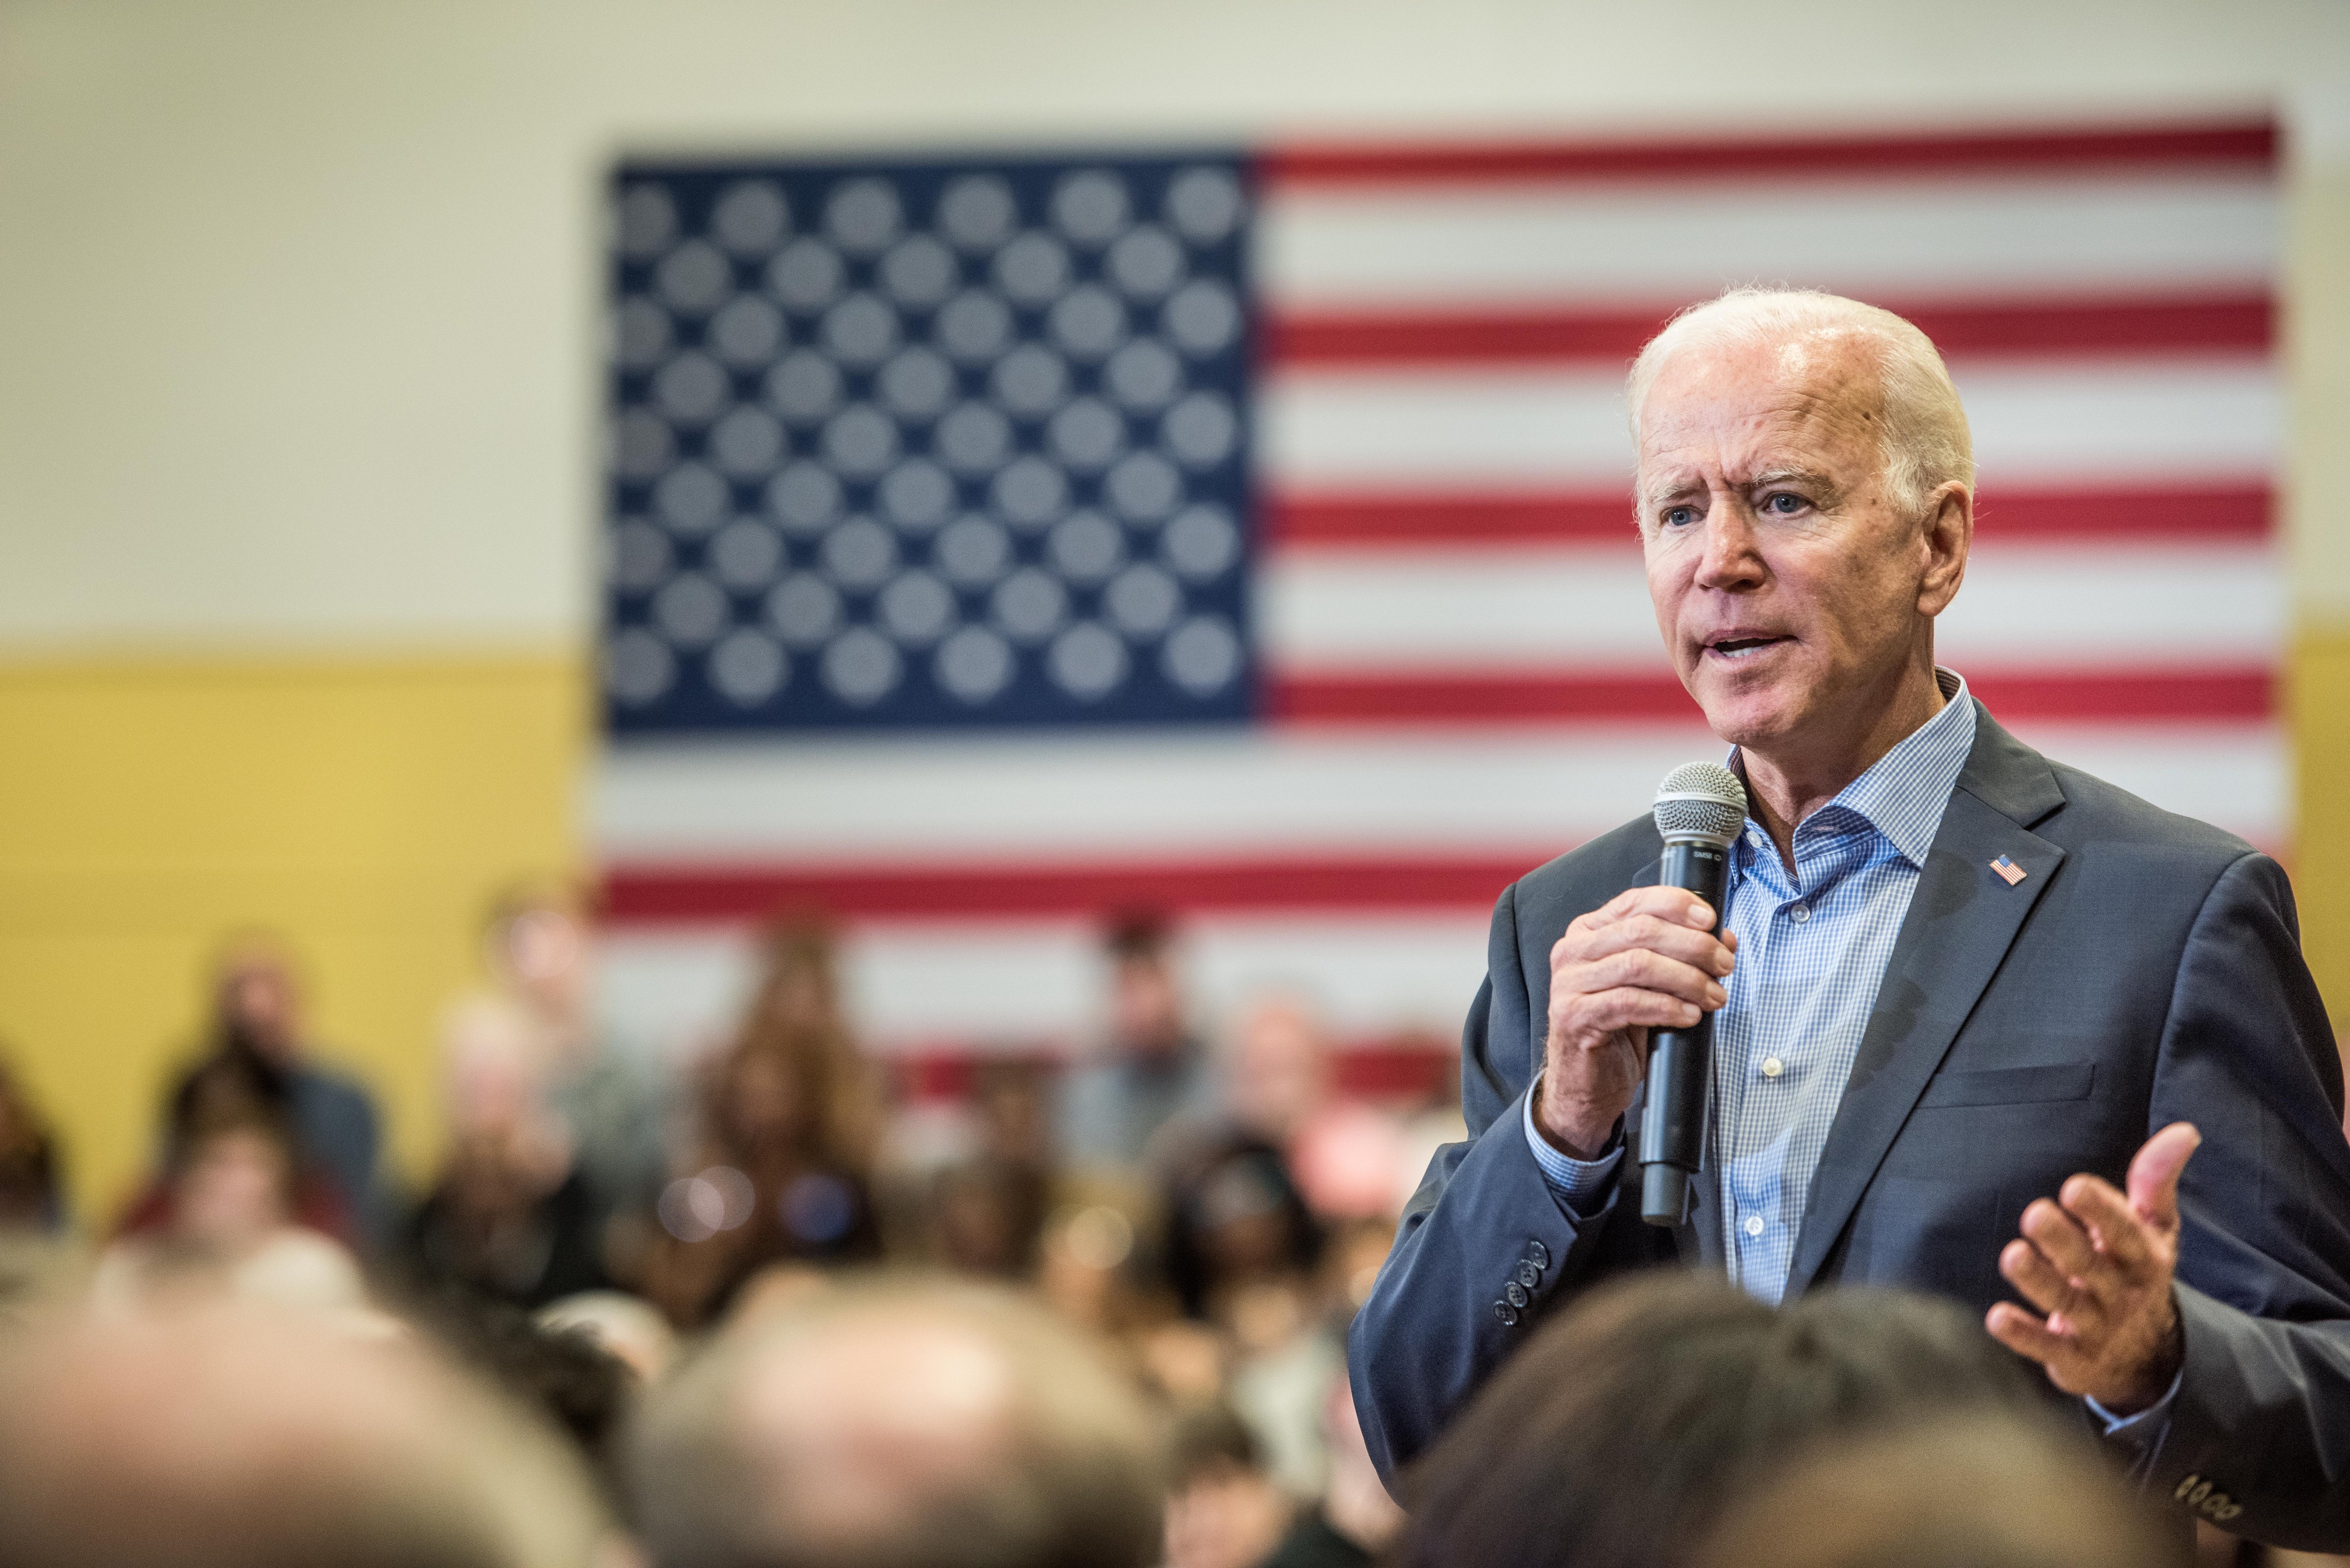 Democratic presidential candidate and former U.S. Vice President Joe Biden addresses a crowd at a town hall event at Clinton College on August 29, 2019 in Rock Hill, South Carolina. (Sean Rayford&mdash;Getty Images)